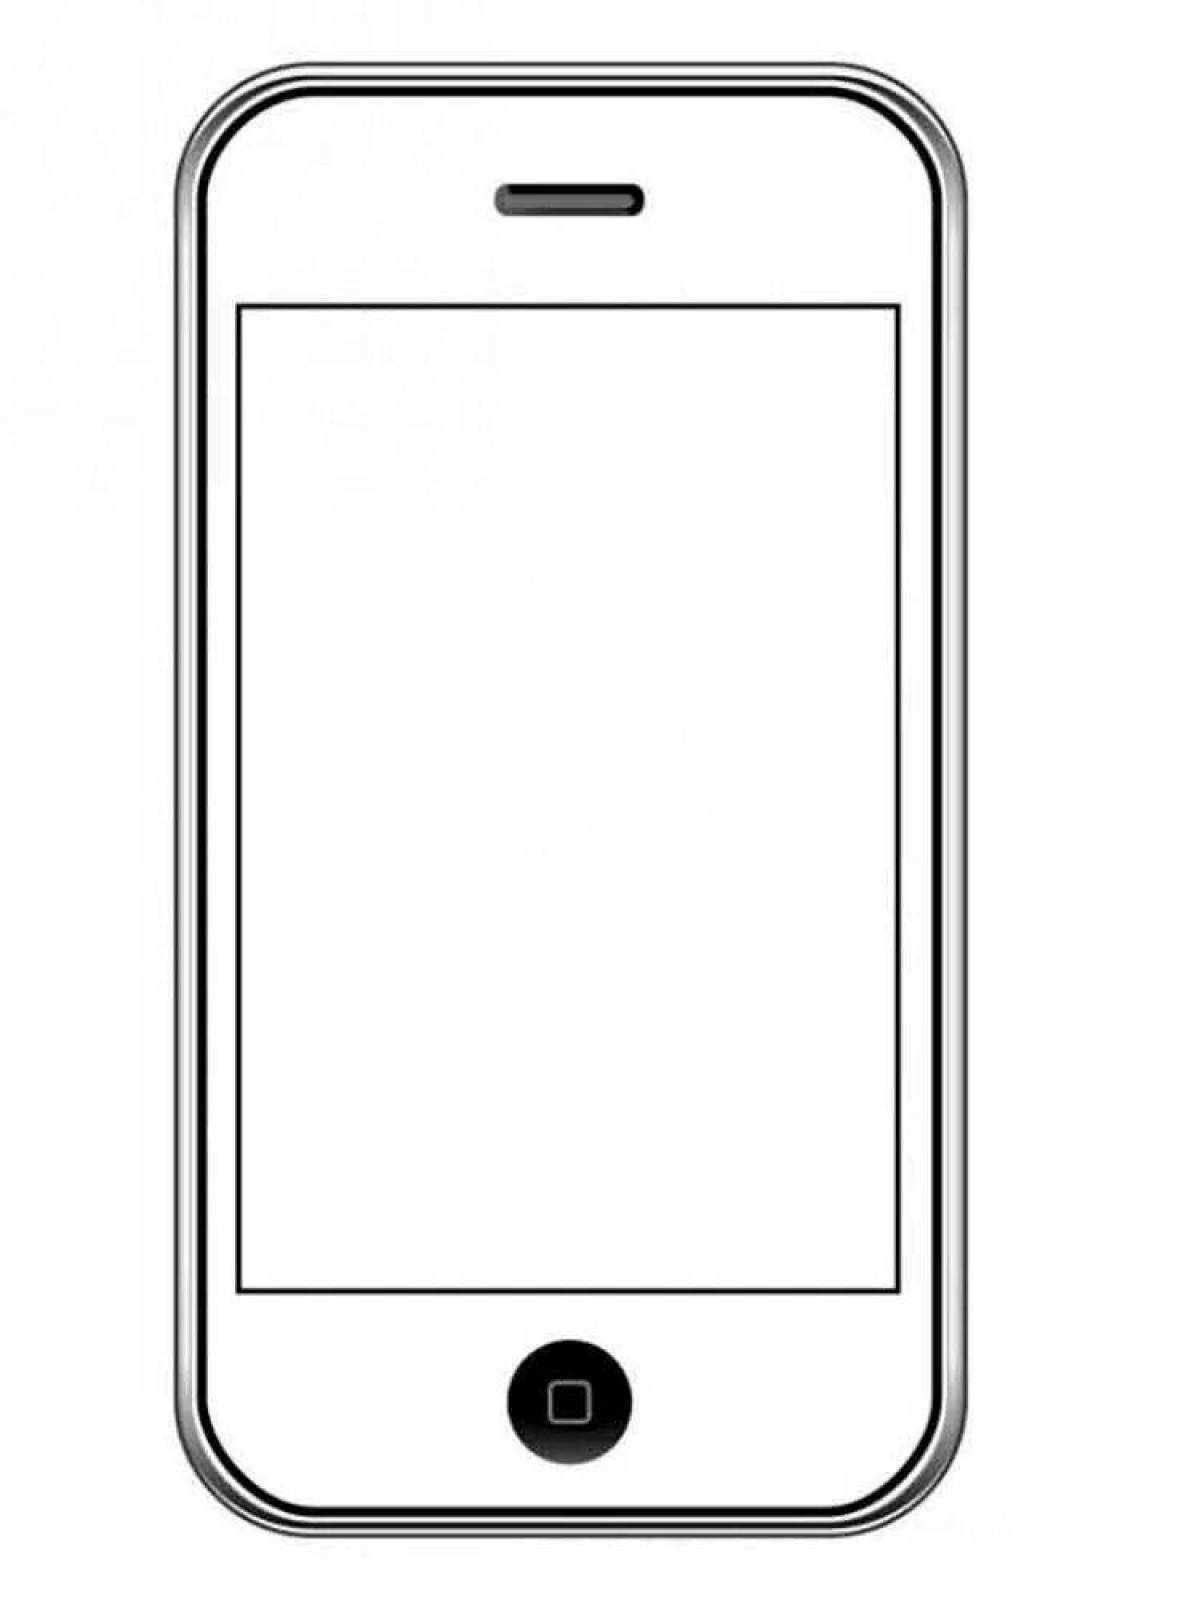 Awesome mobile phone coloring page